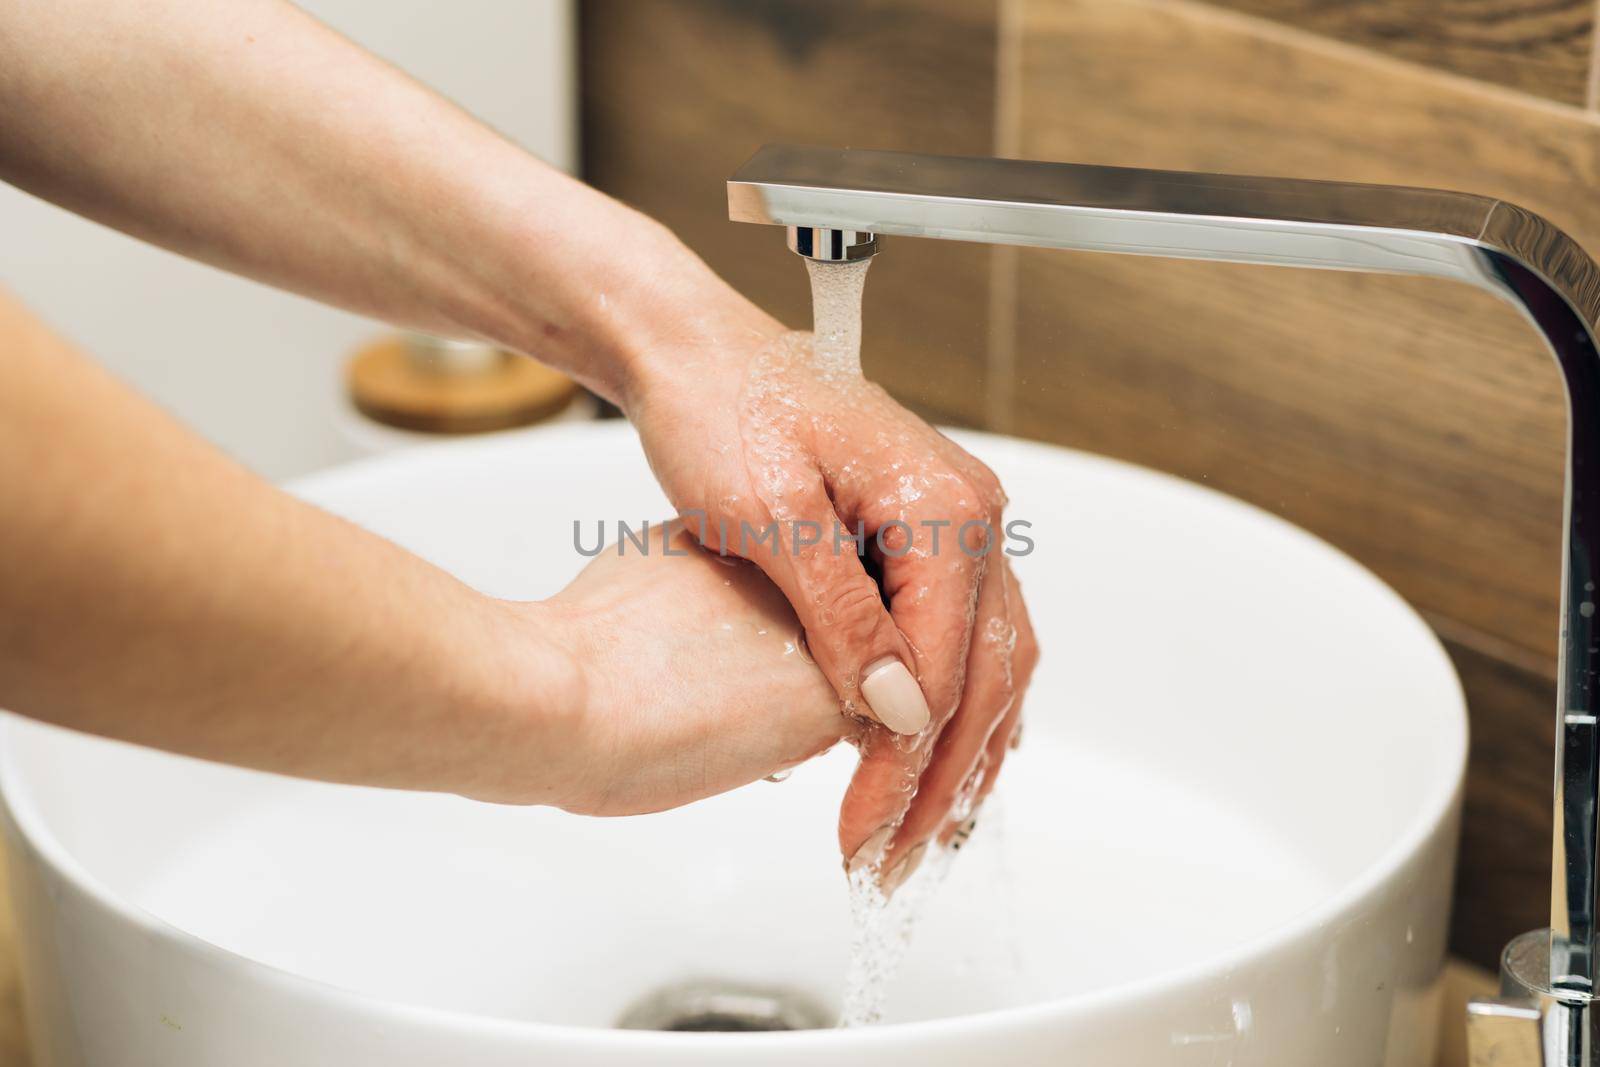 Concept of health, cleaning and preventing germs and coronavirus from contacting hands. Hands of woman wash their hands in a sink to wash the skin and water flows through the hands by uflypro